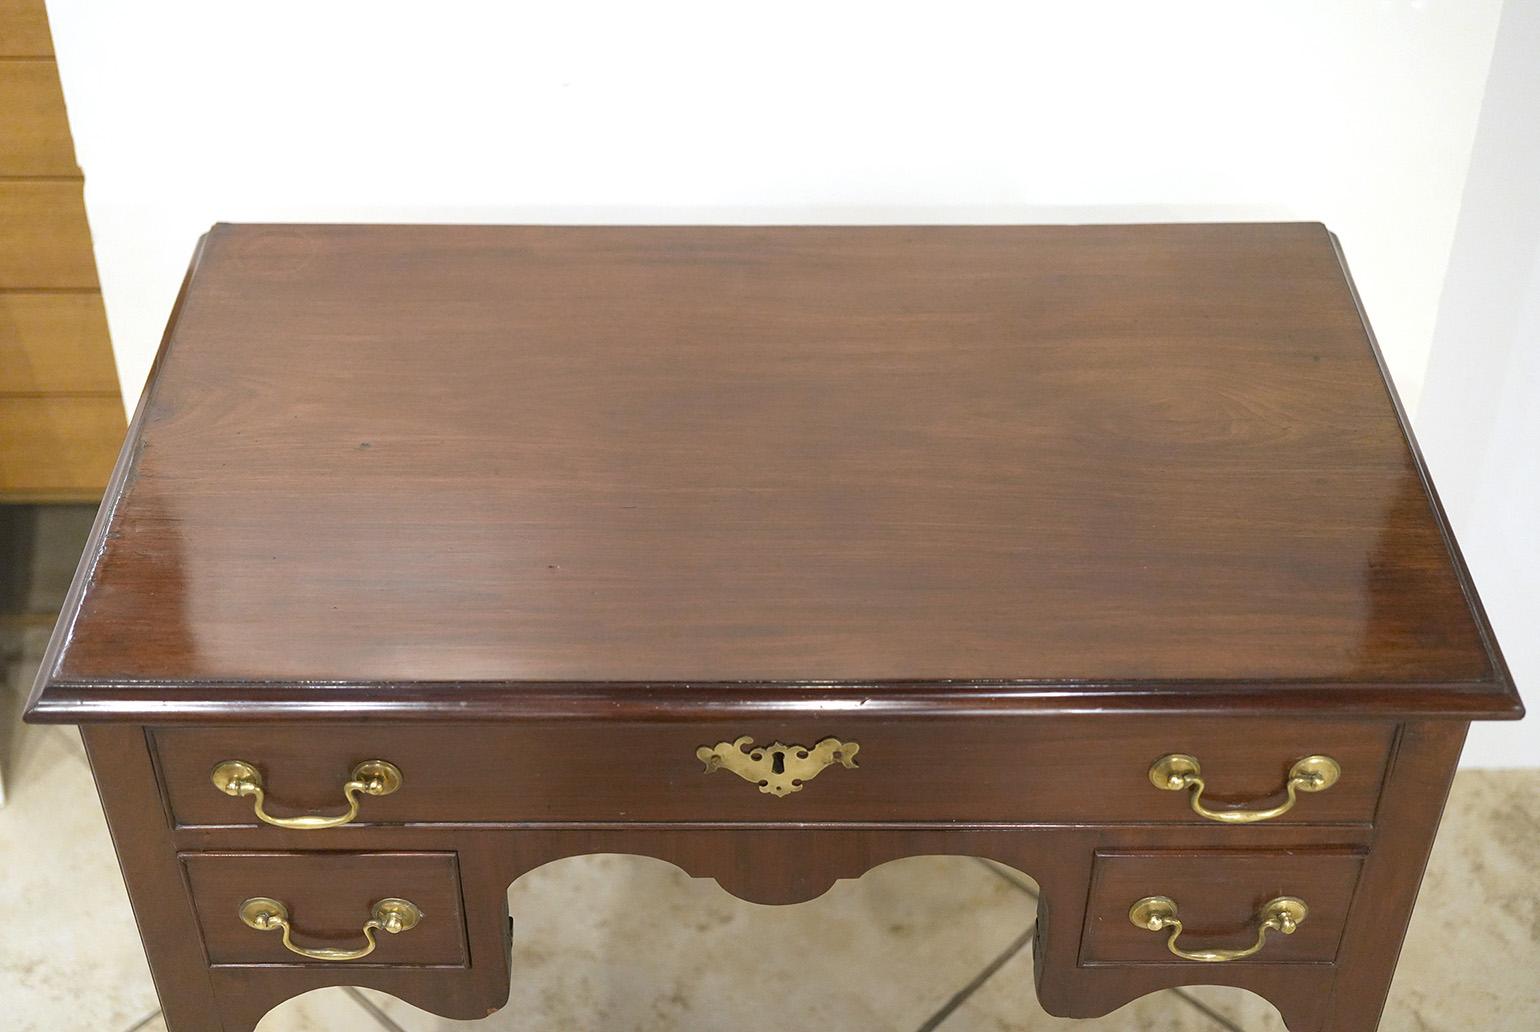 English mahogany Queen Anne lowboy. Molded edge top. Three cock beaded drawers rested on pad feet. Circa 1790s.